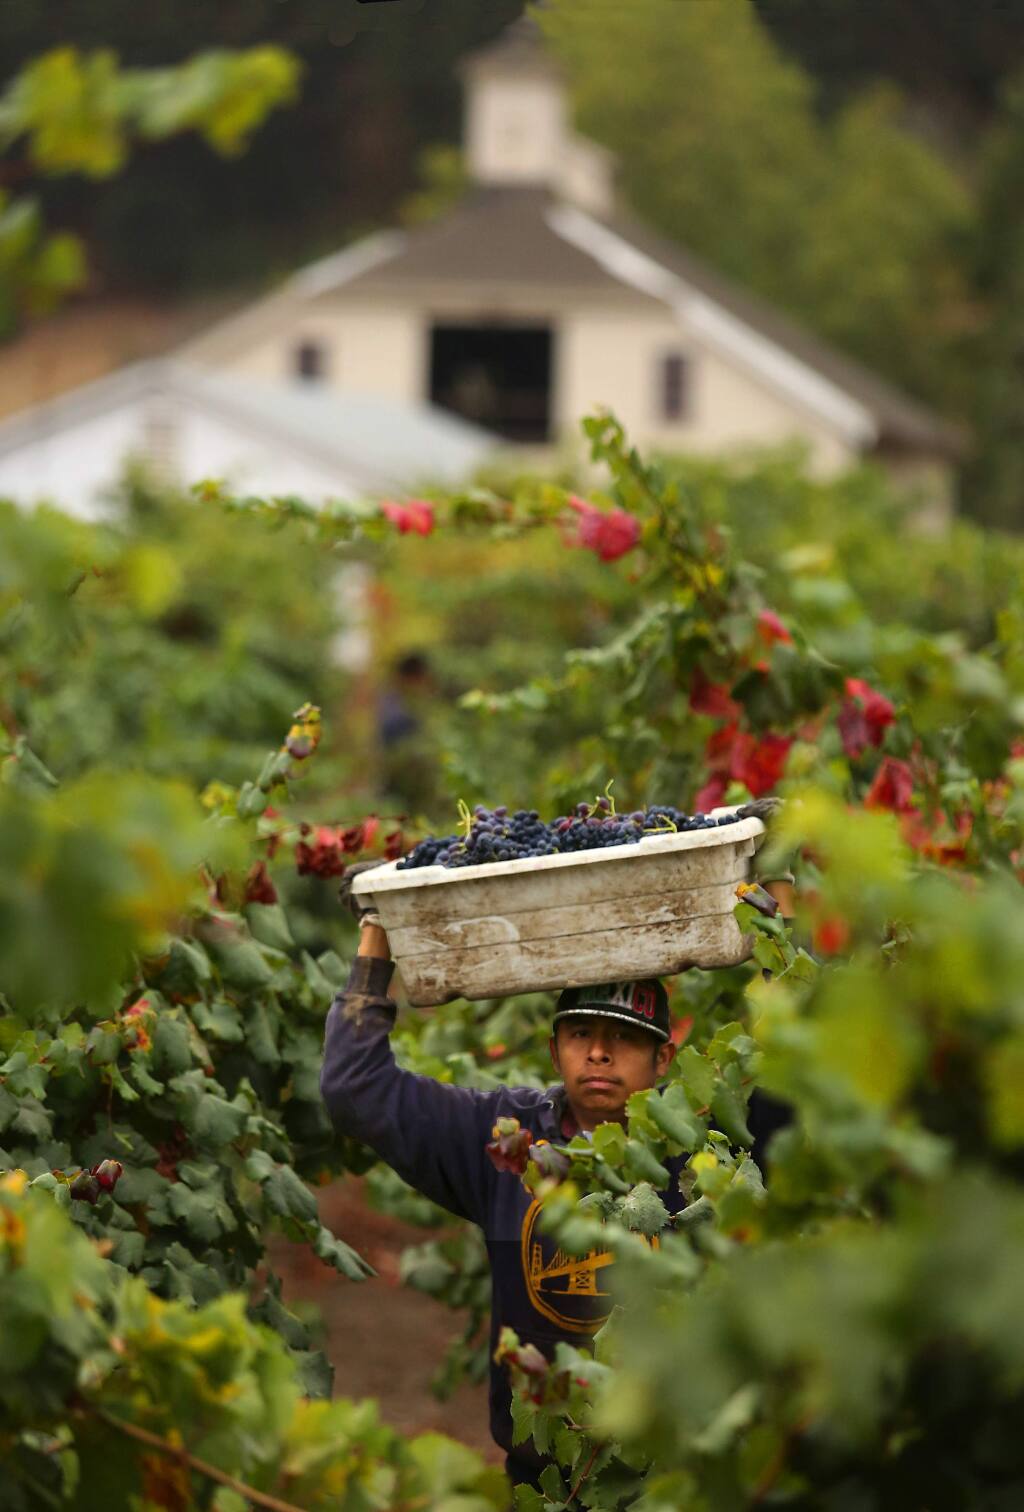 Workers run lugs filled with grapes at the Pagani Ranch along Hwy 12 in the Sonoma Valley. (John Burgess/The Press Democrat)